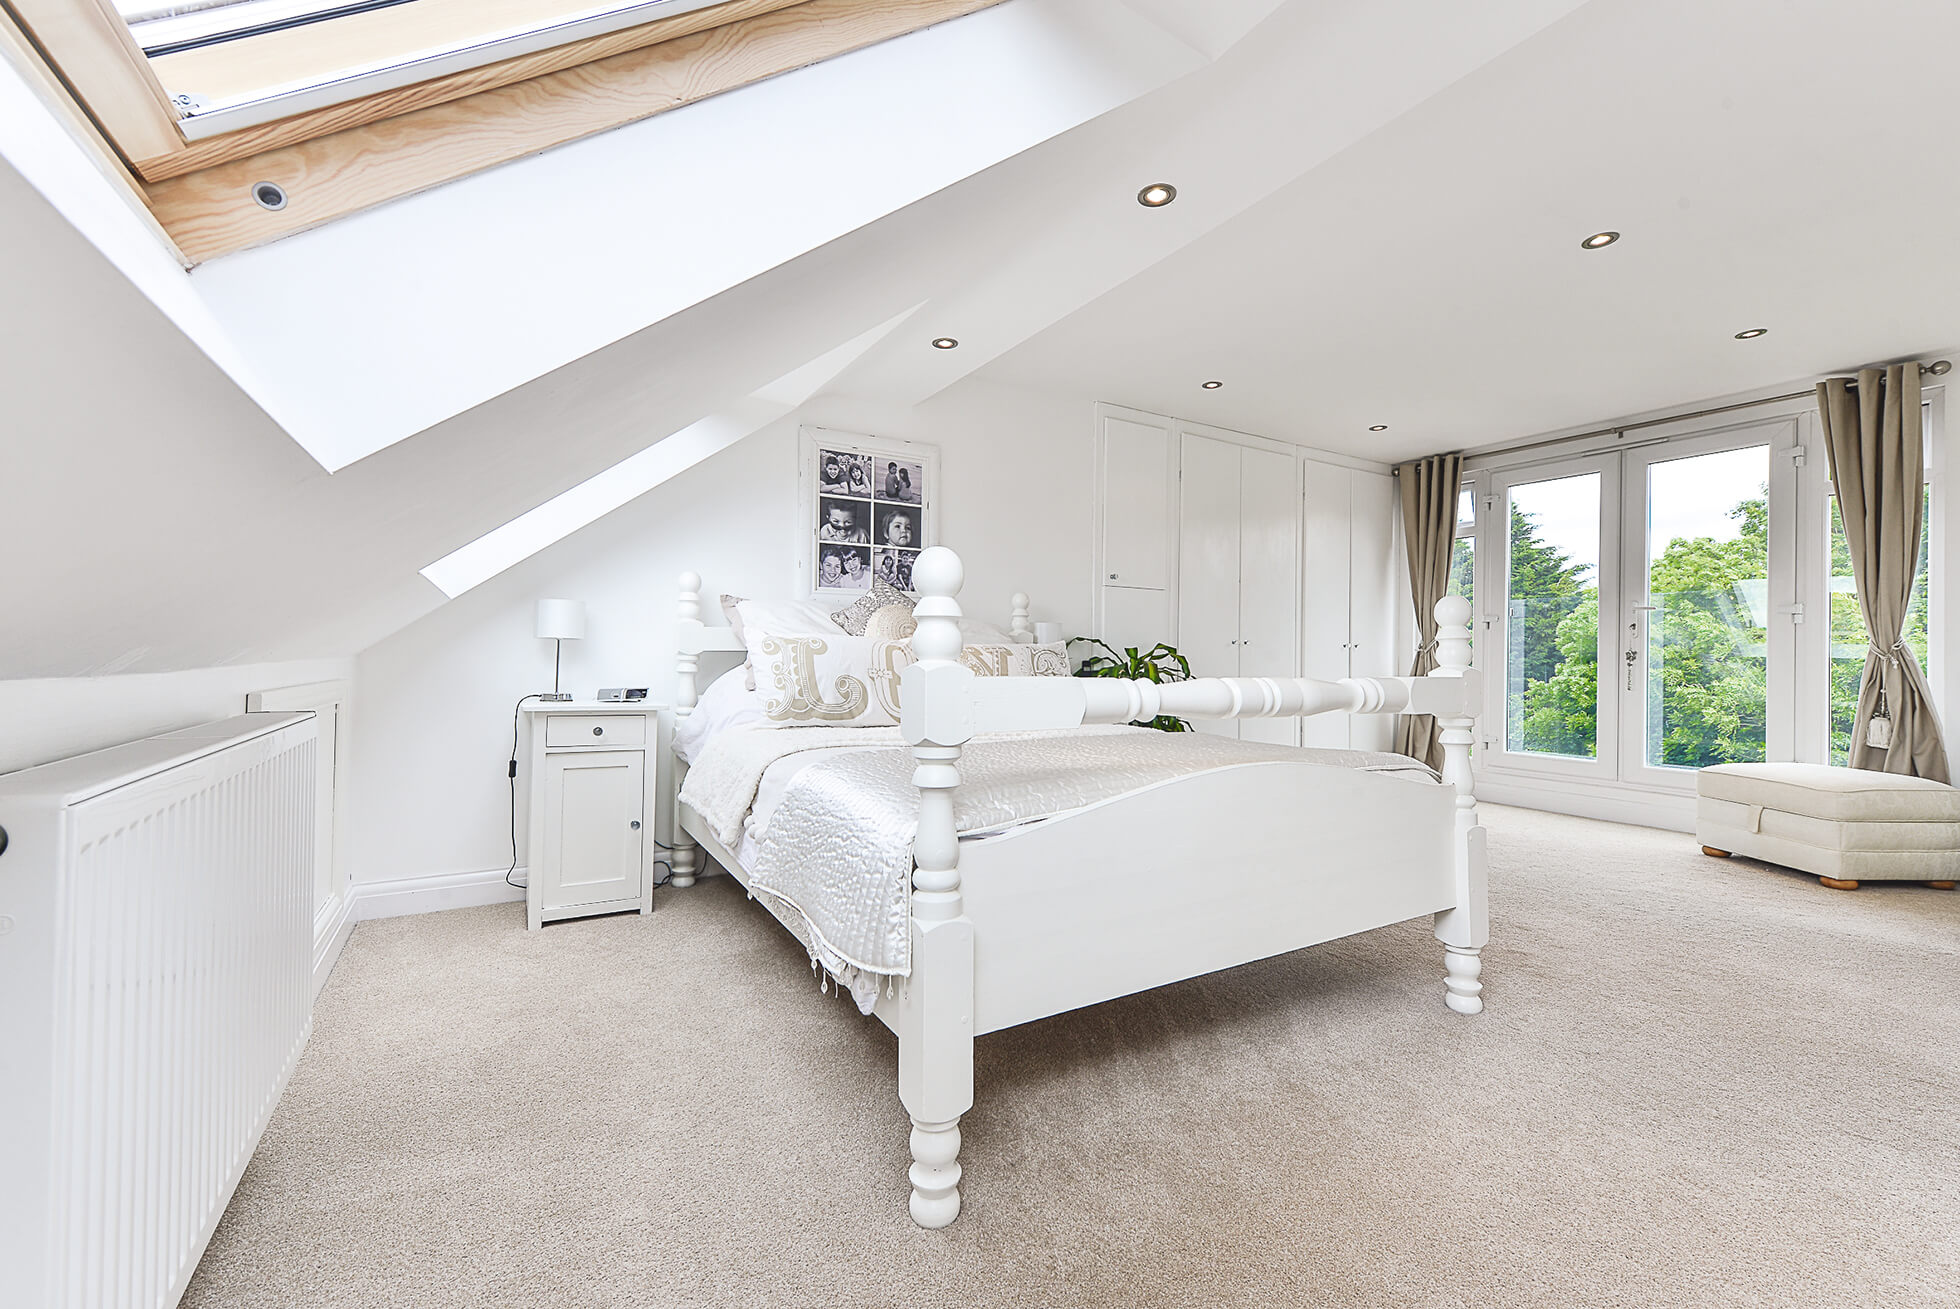 Do you have a question about converting your Loft in Hadham Ford? Here are the most popular questions asked by our clients.